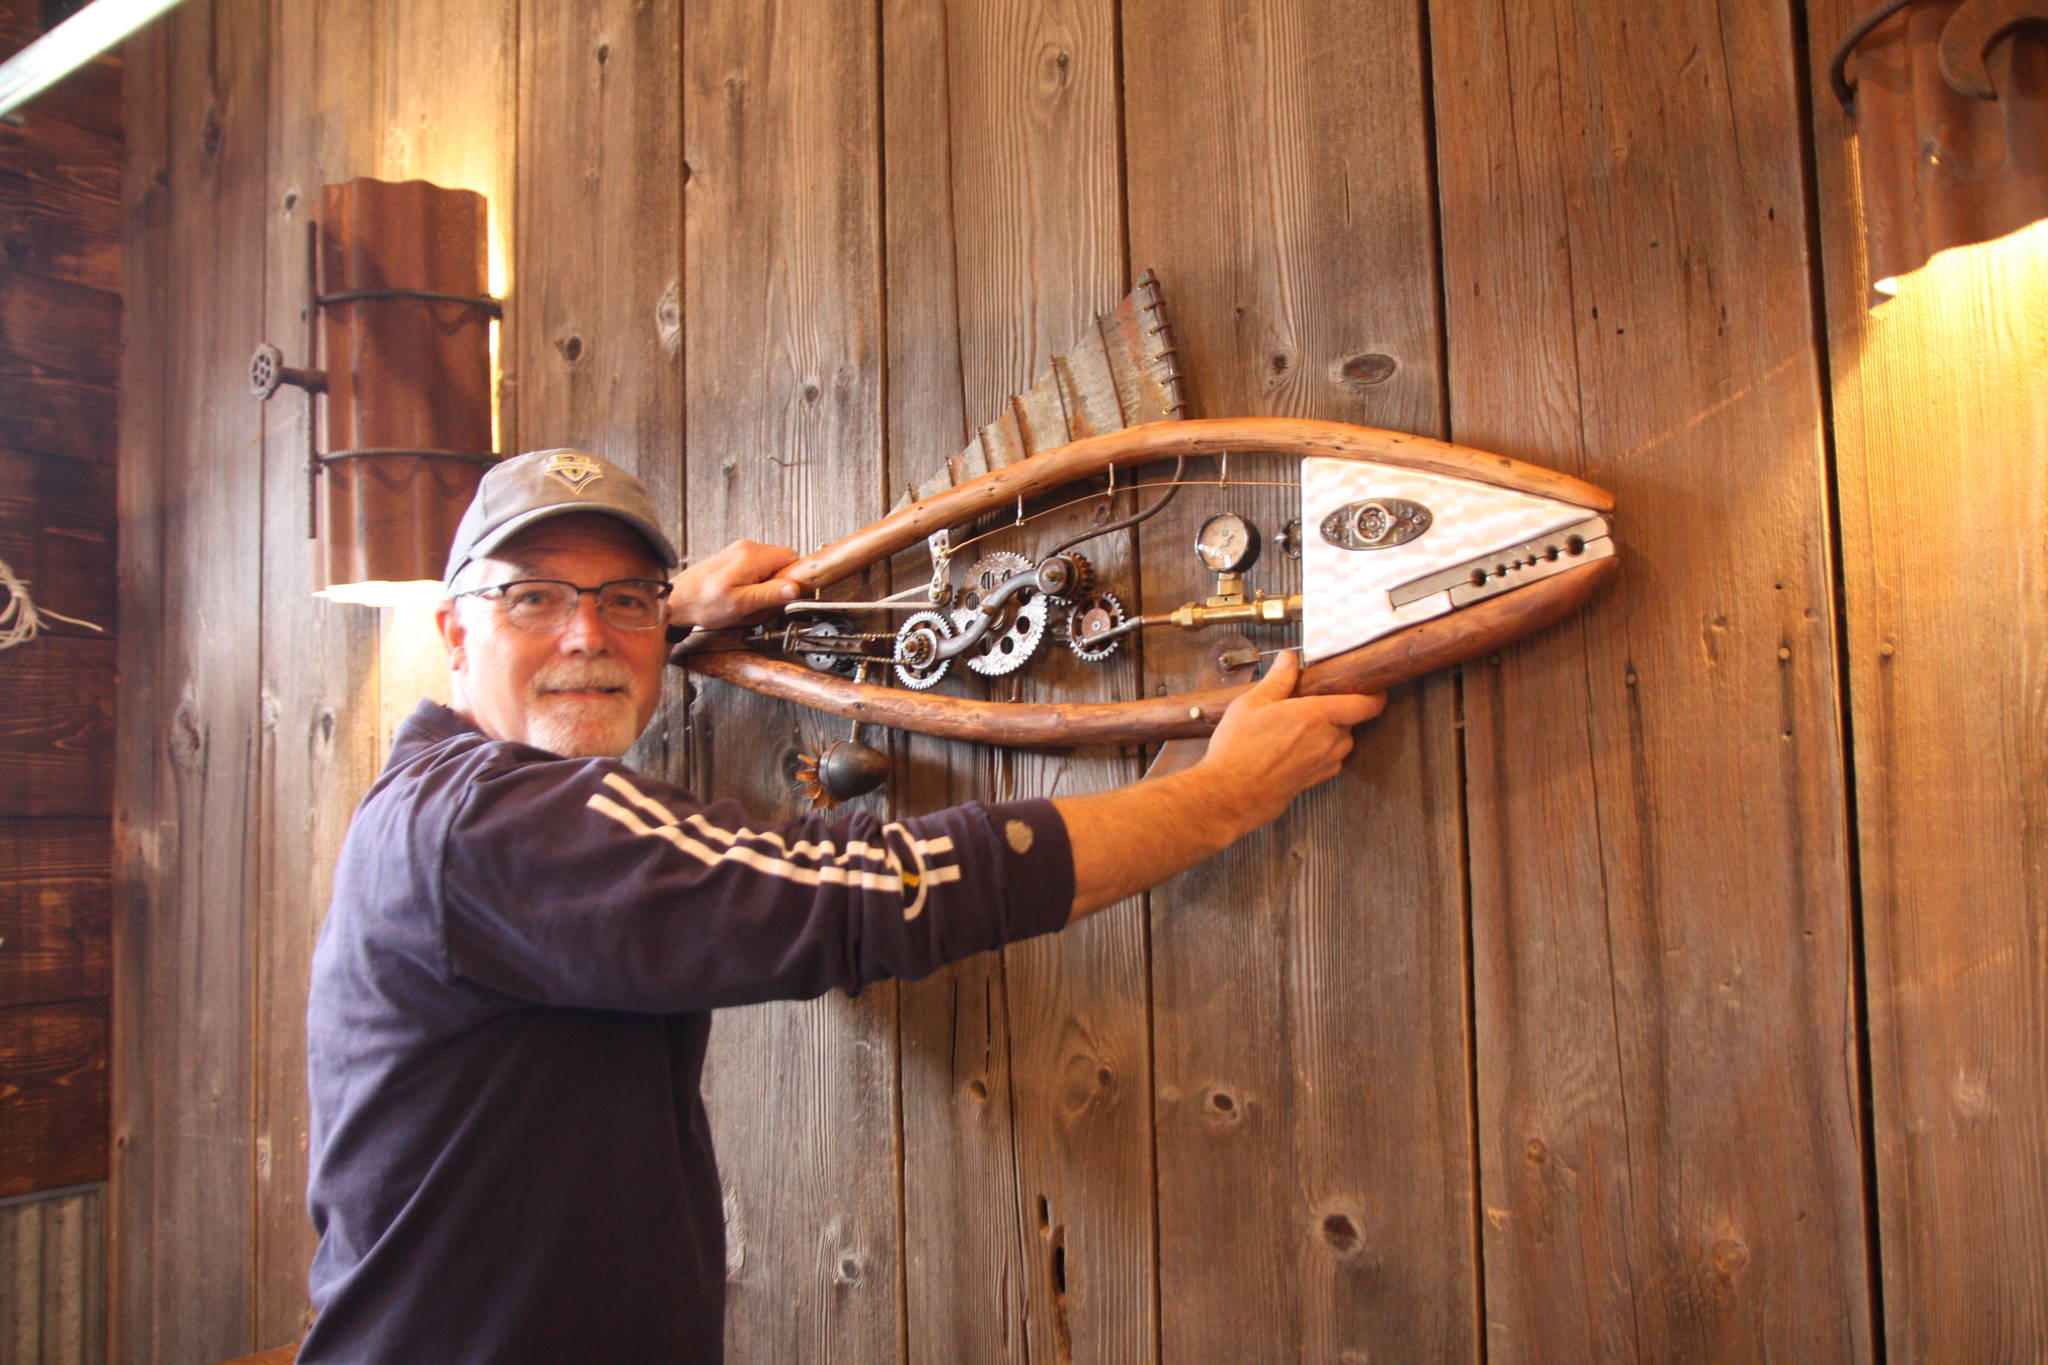 Artist Mark Wacker hangs a fish ornament he created for the taproom barn.